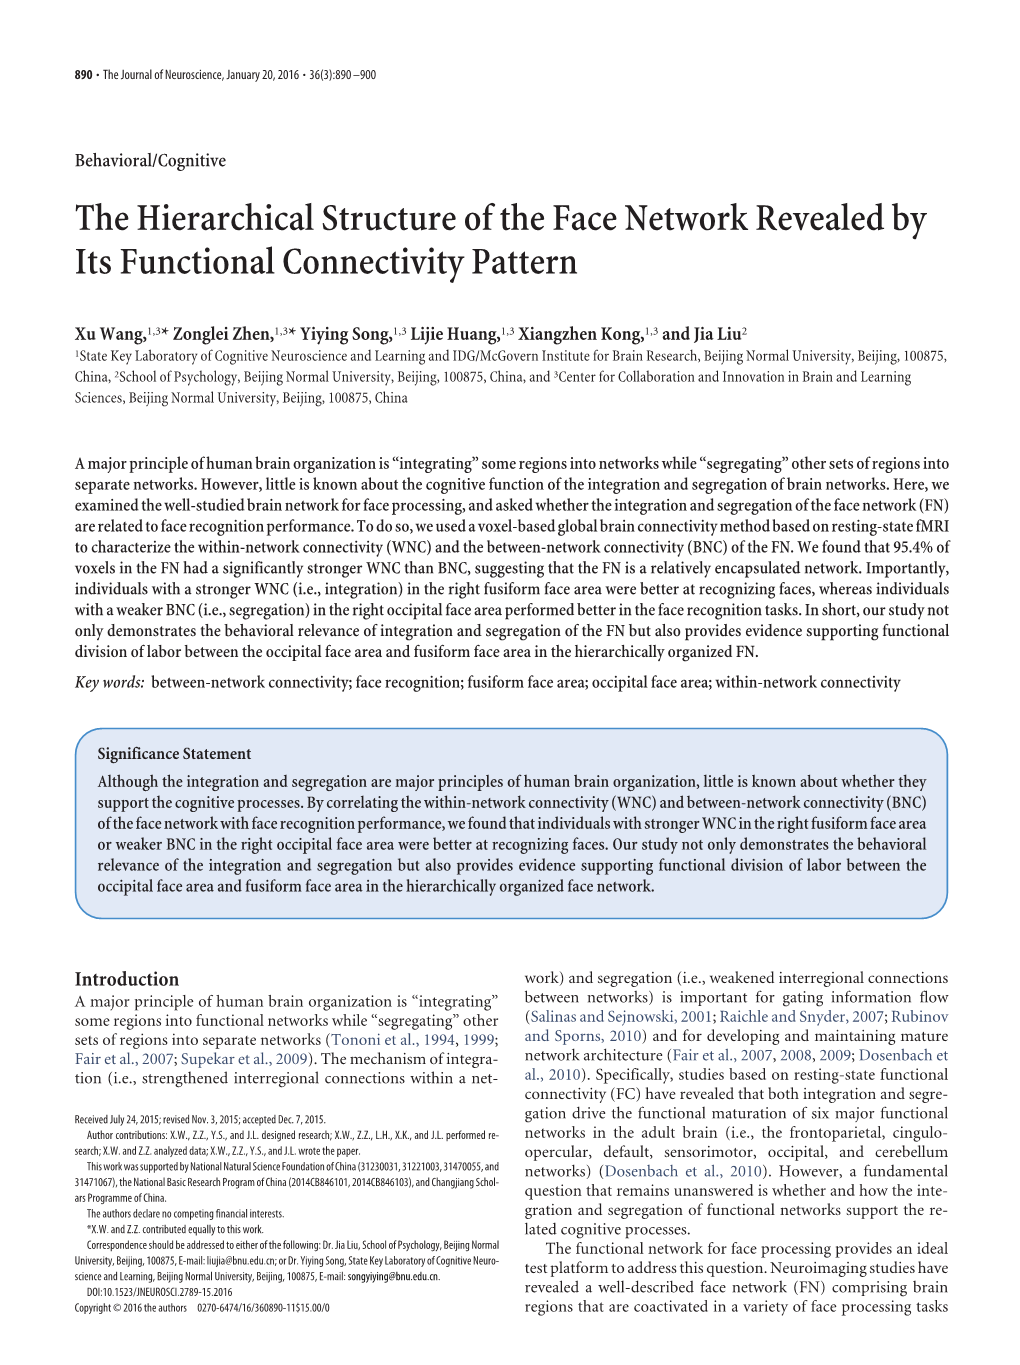 The Hierarchical Structure of the Face Network Revealed by Its Functional Connectivity Pattern